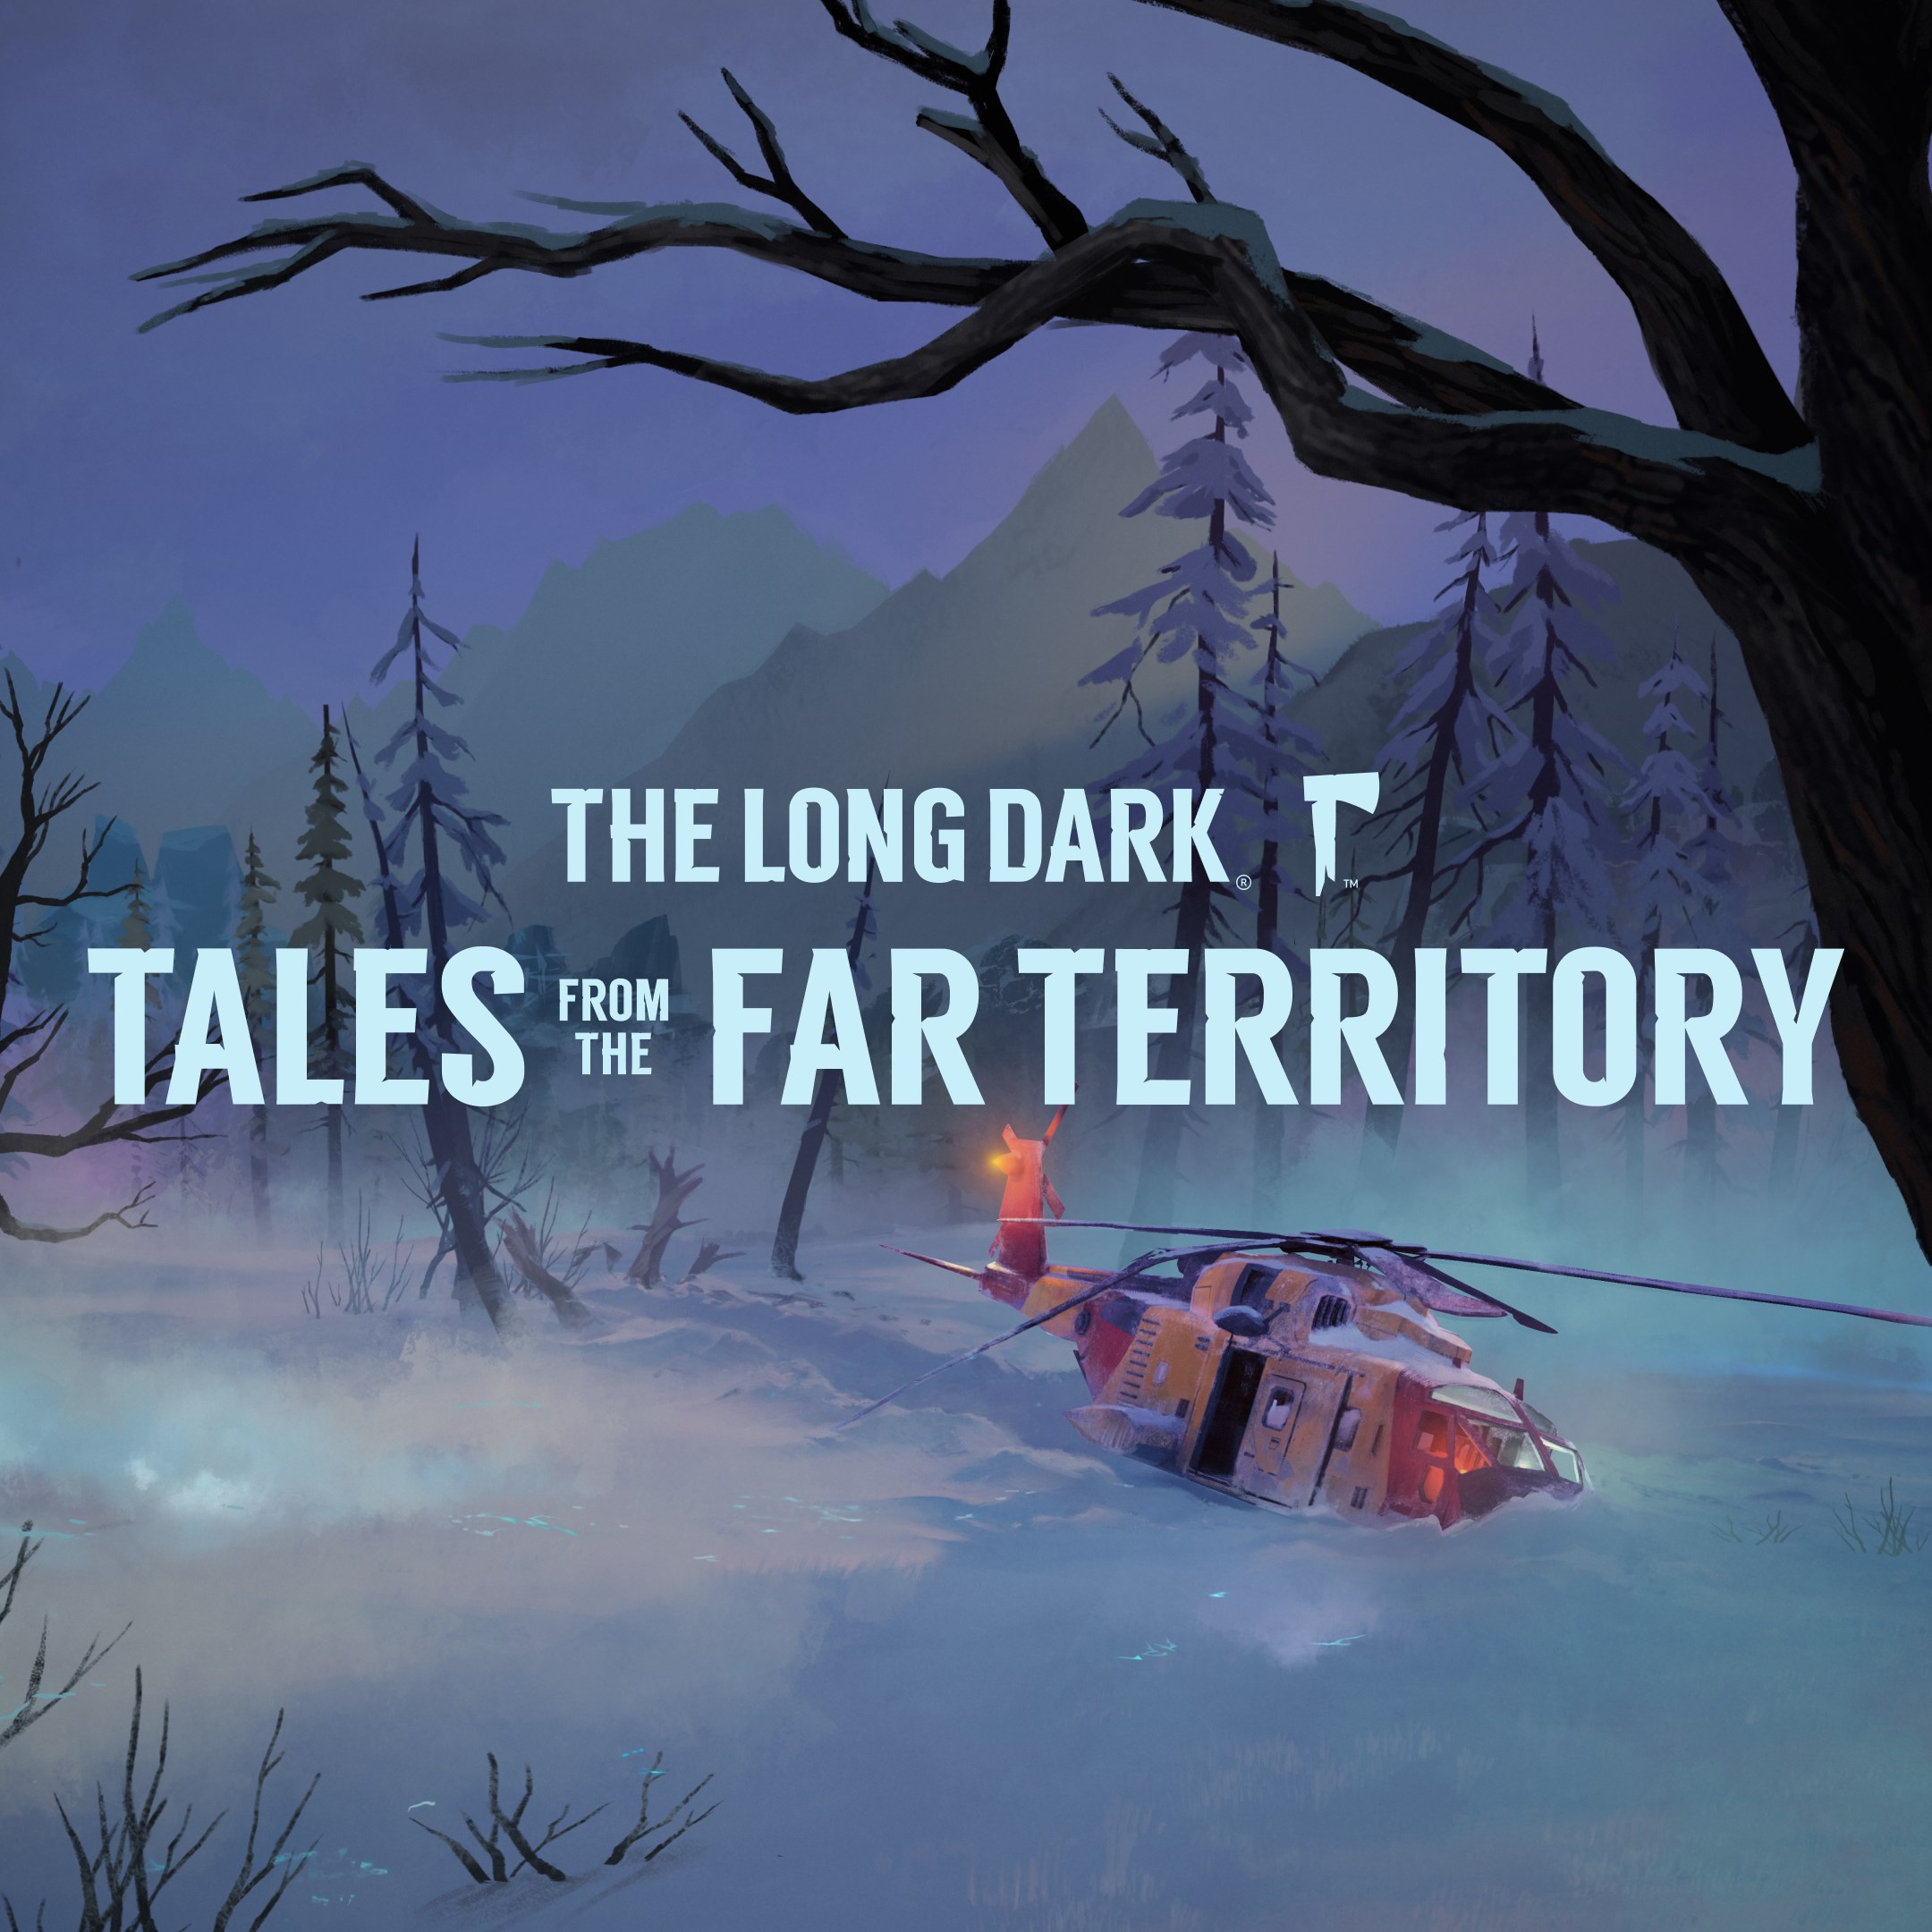 Tales from the far territory. The long Dark Tales from the far Territory карта.